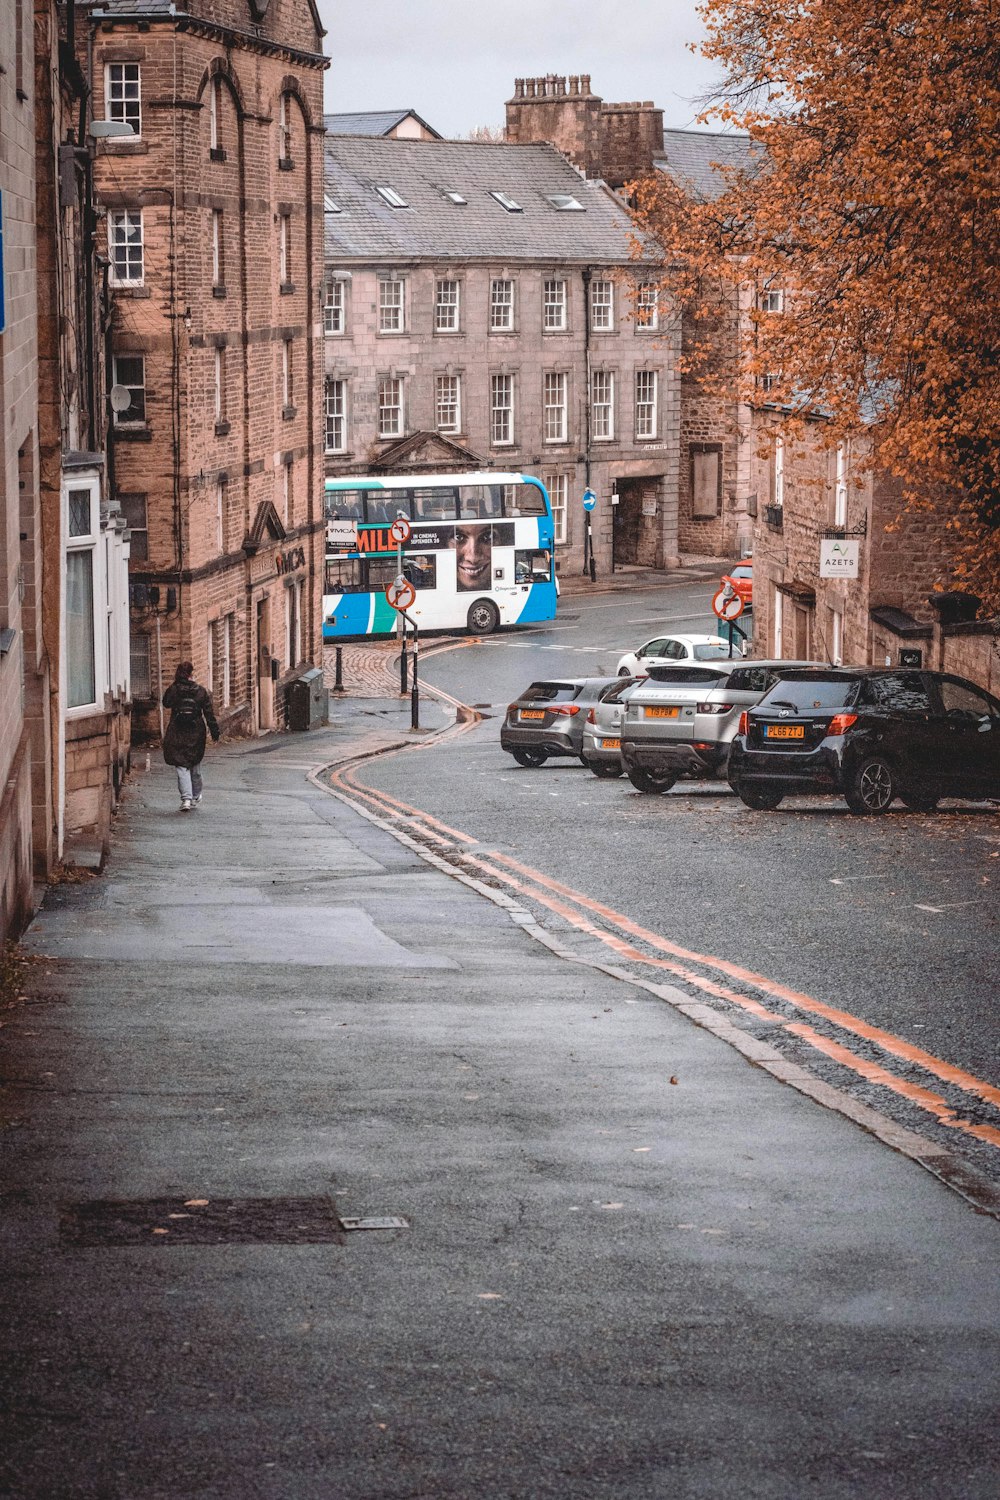 a bus and cars on a street